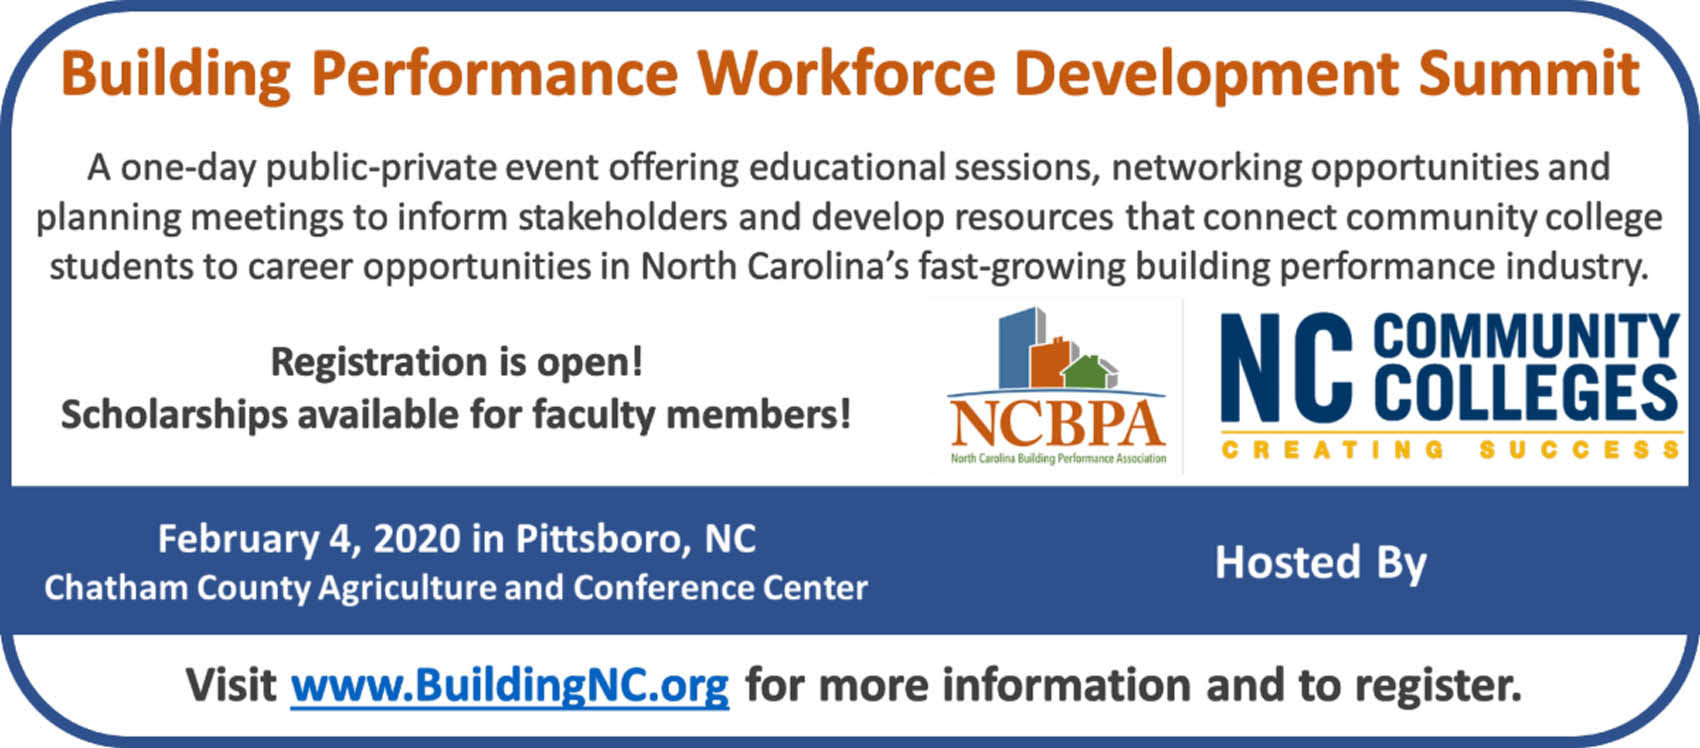 Read the full story, CCCC will host Building Performance Workforce Development Summit